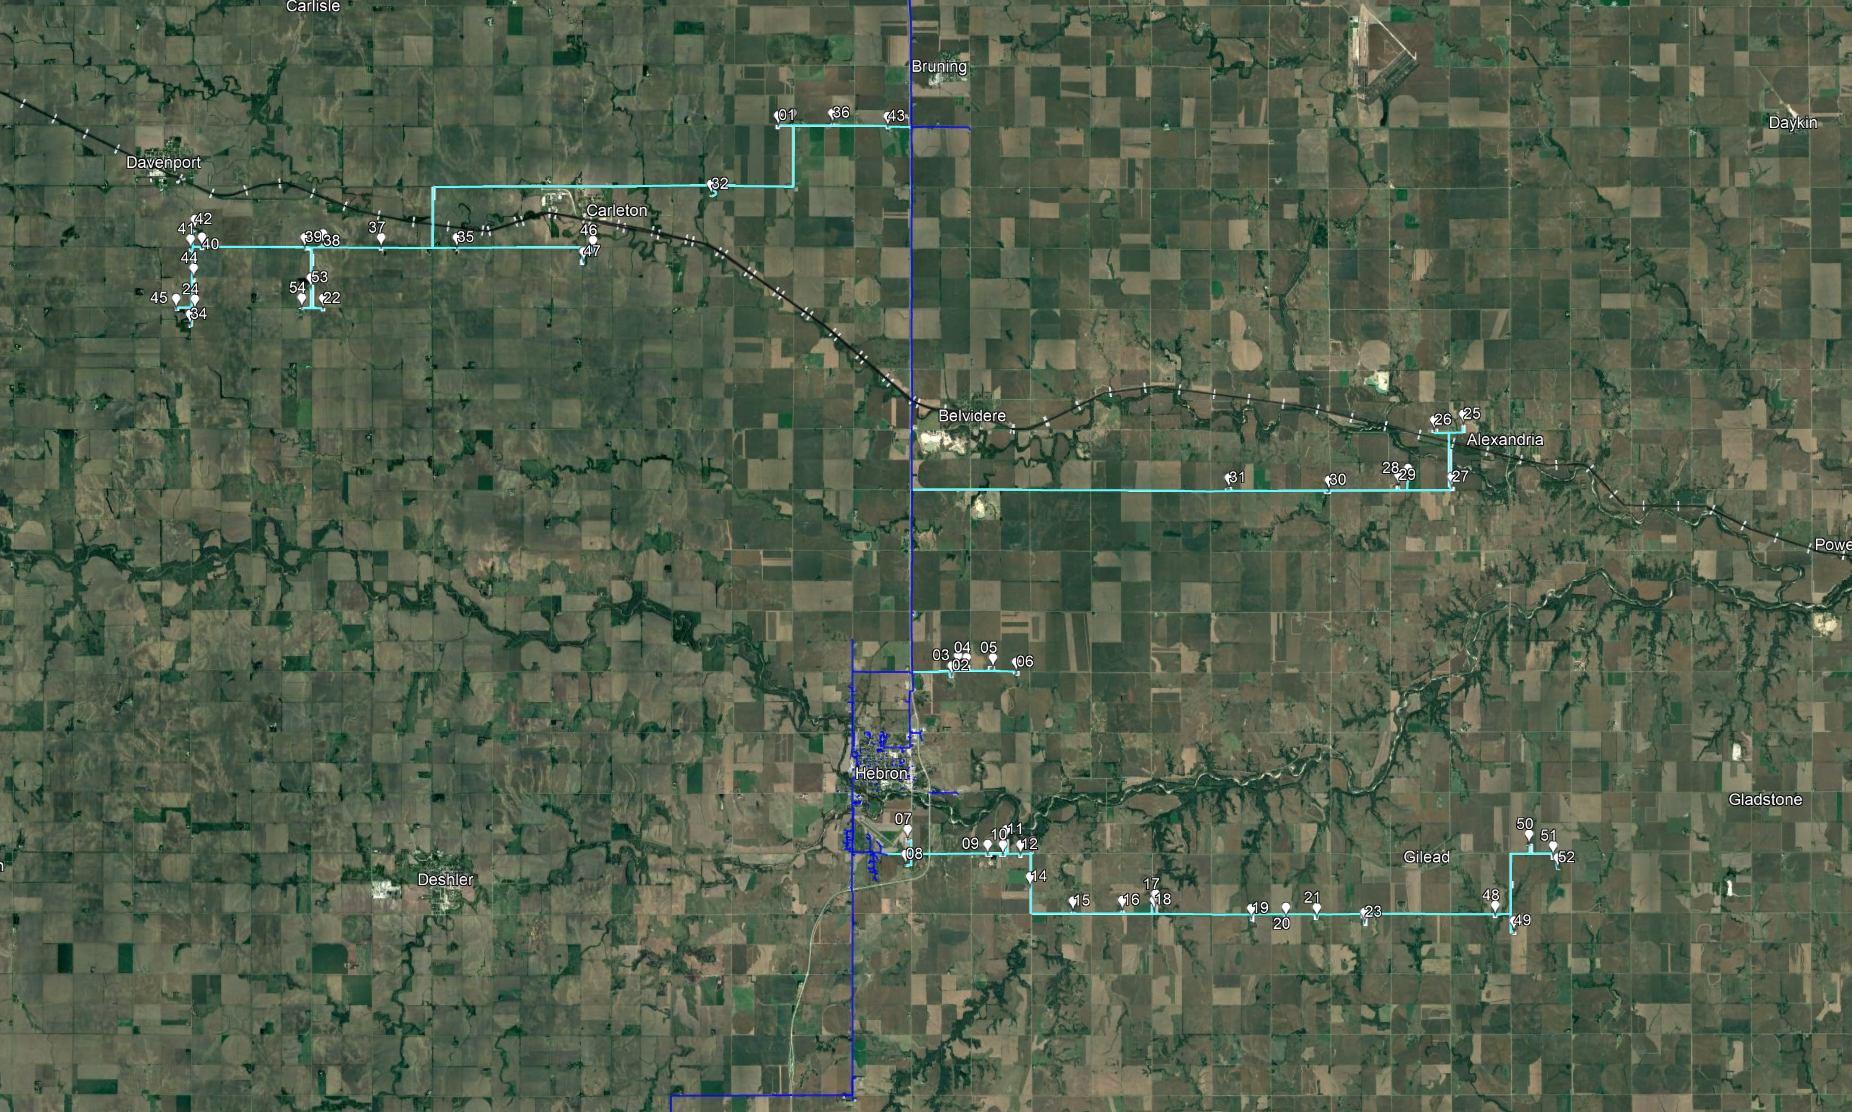 This map shows where telecommunications company Glenwood will lay new cables for broadband internet. Dark blue lines represent existing cable. Light blue lines represent cable that will be laid. Courtesy of Glenwood